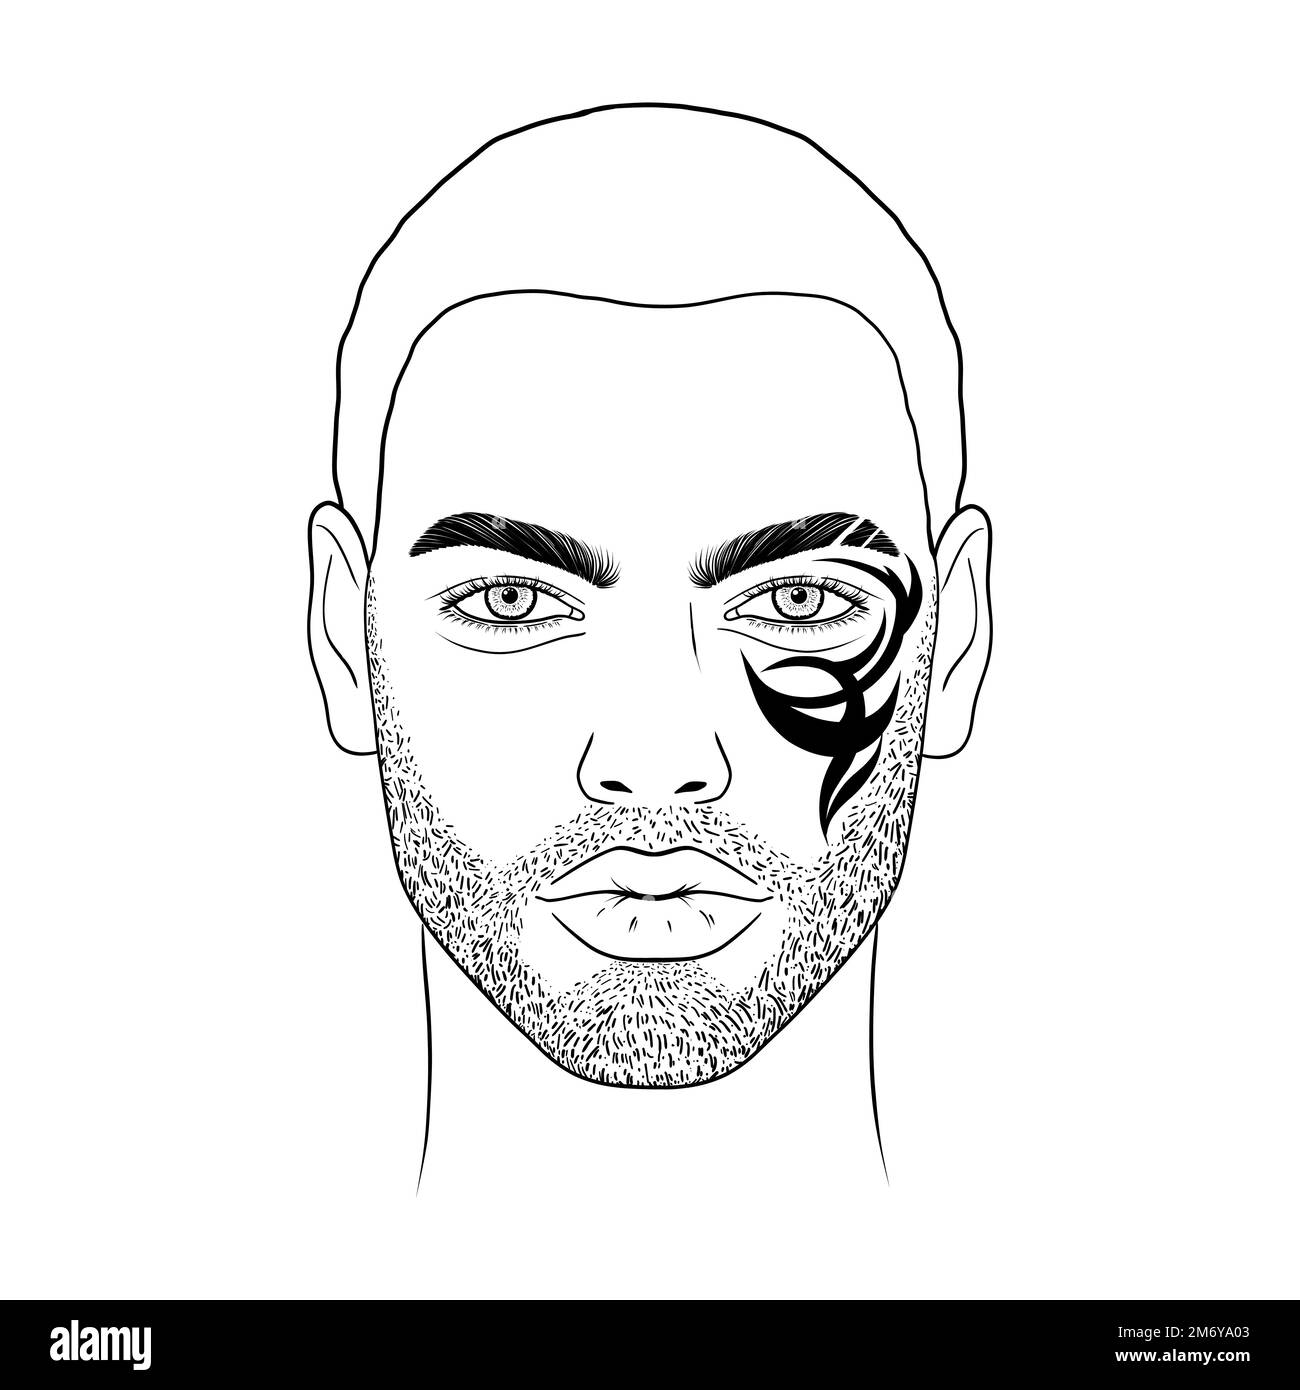 Man with face tattoo. Stock Vector